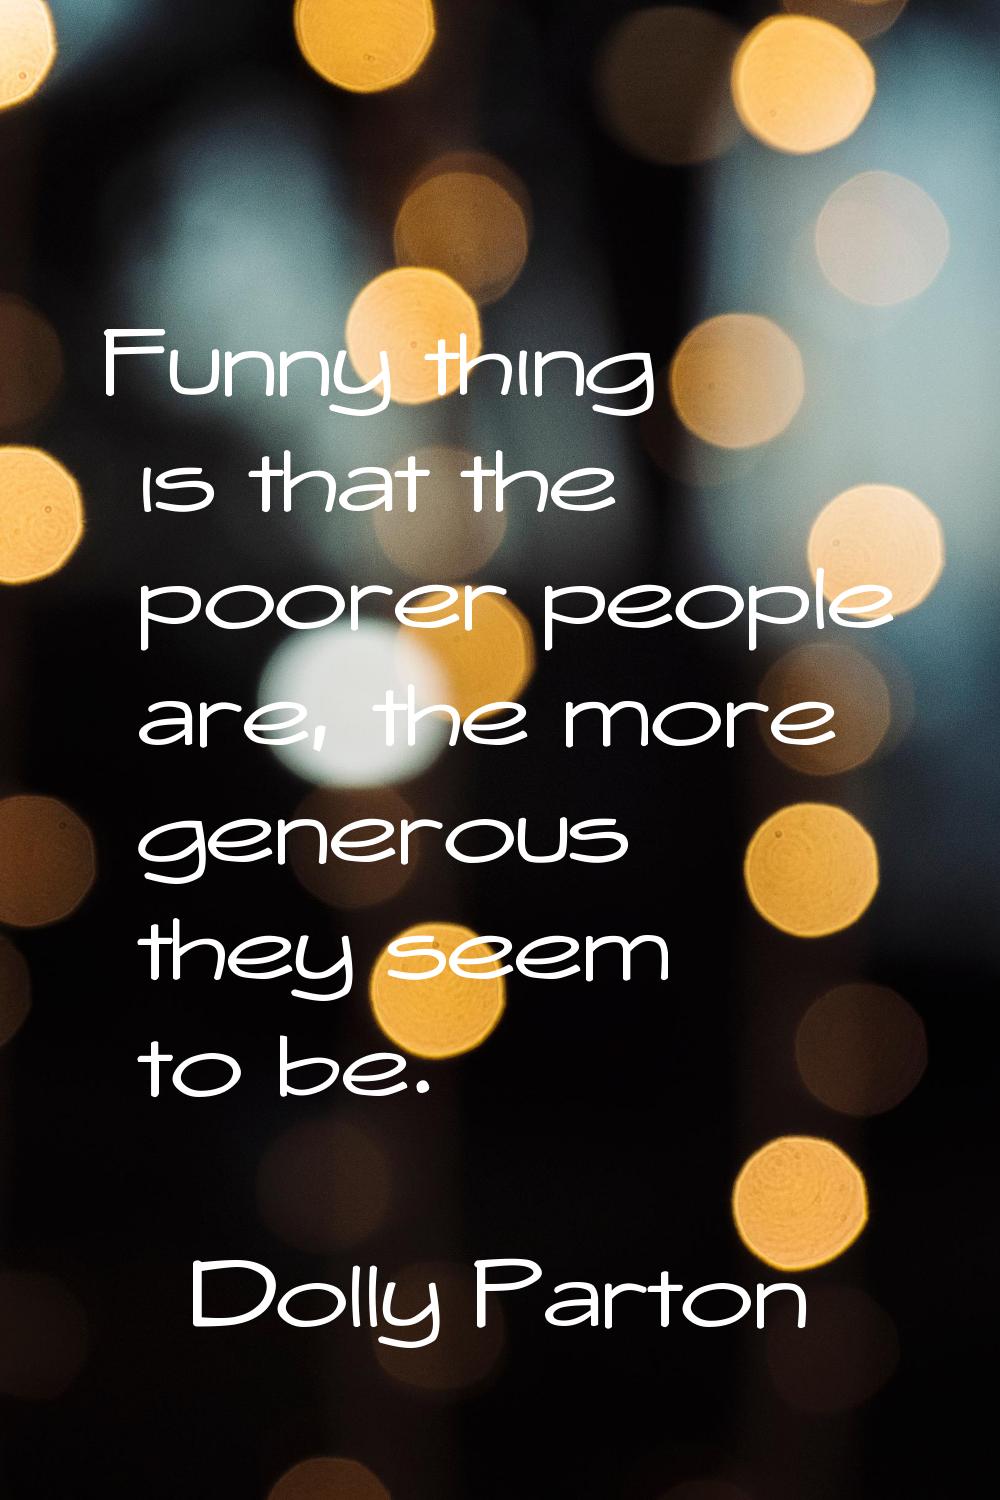 Funny thing is that the poorer people are, the more generous they seem to be.